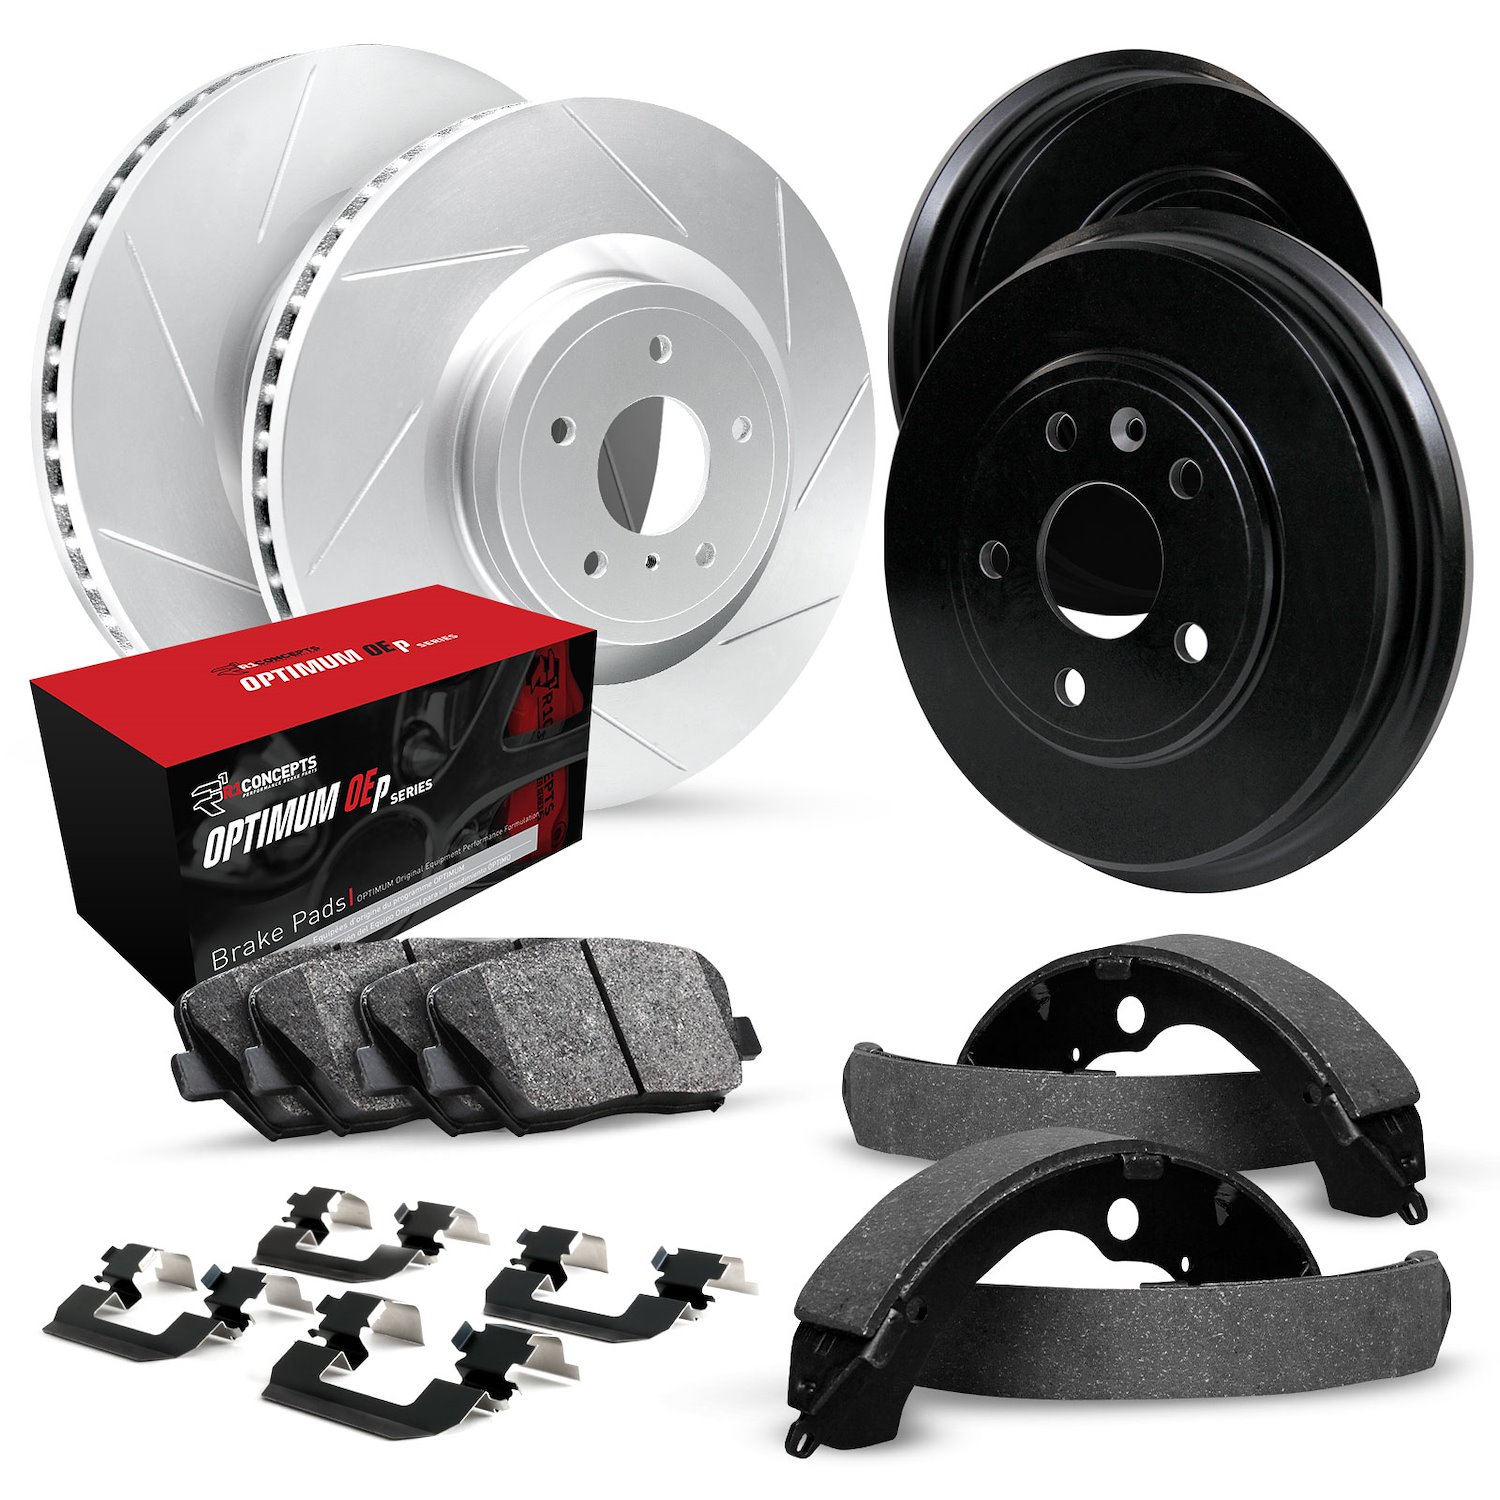 GEO-Carbon Slotted Brake Rotor & Drum Set w/Optimum OE Pads, Shoes, & Hardware, 1994-1995 GM, Position: Front & Rear